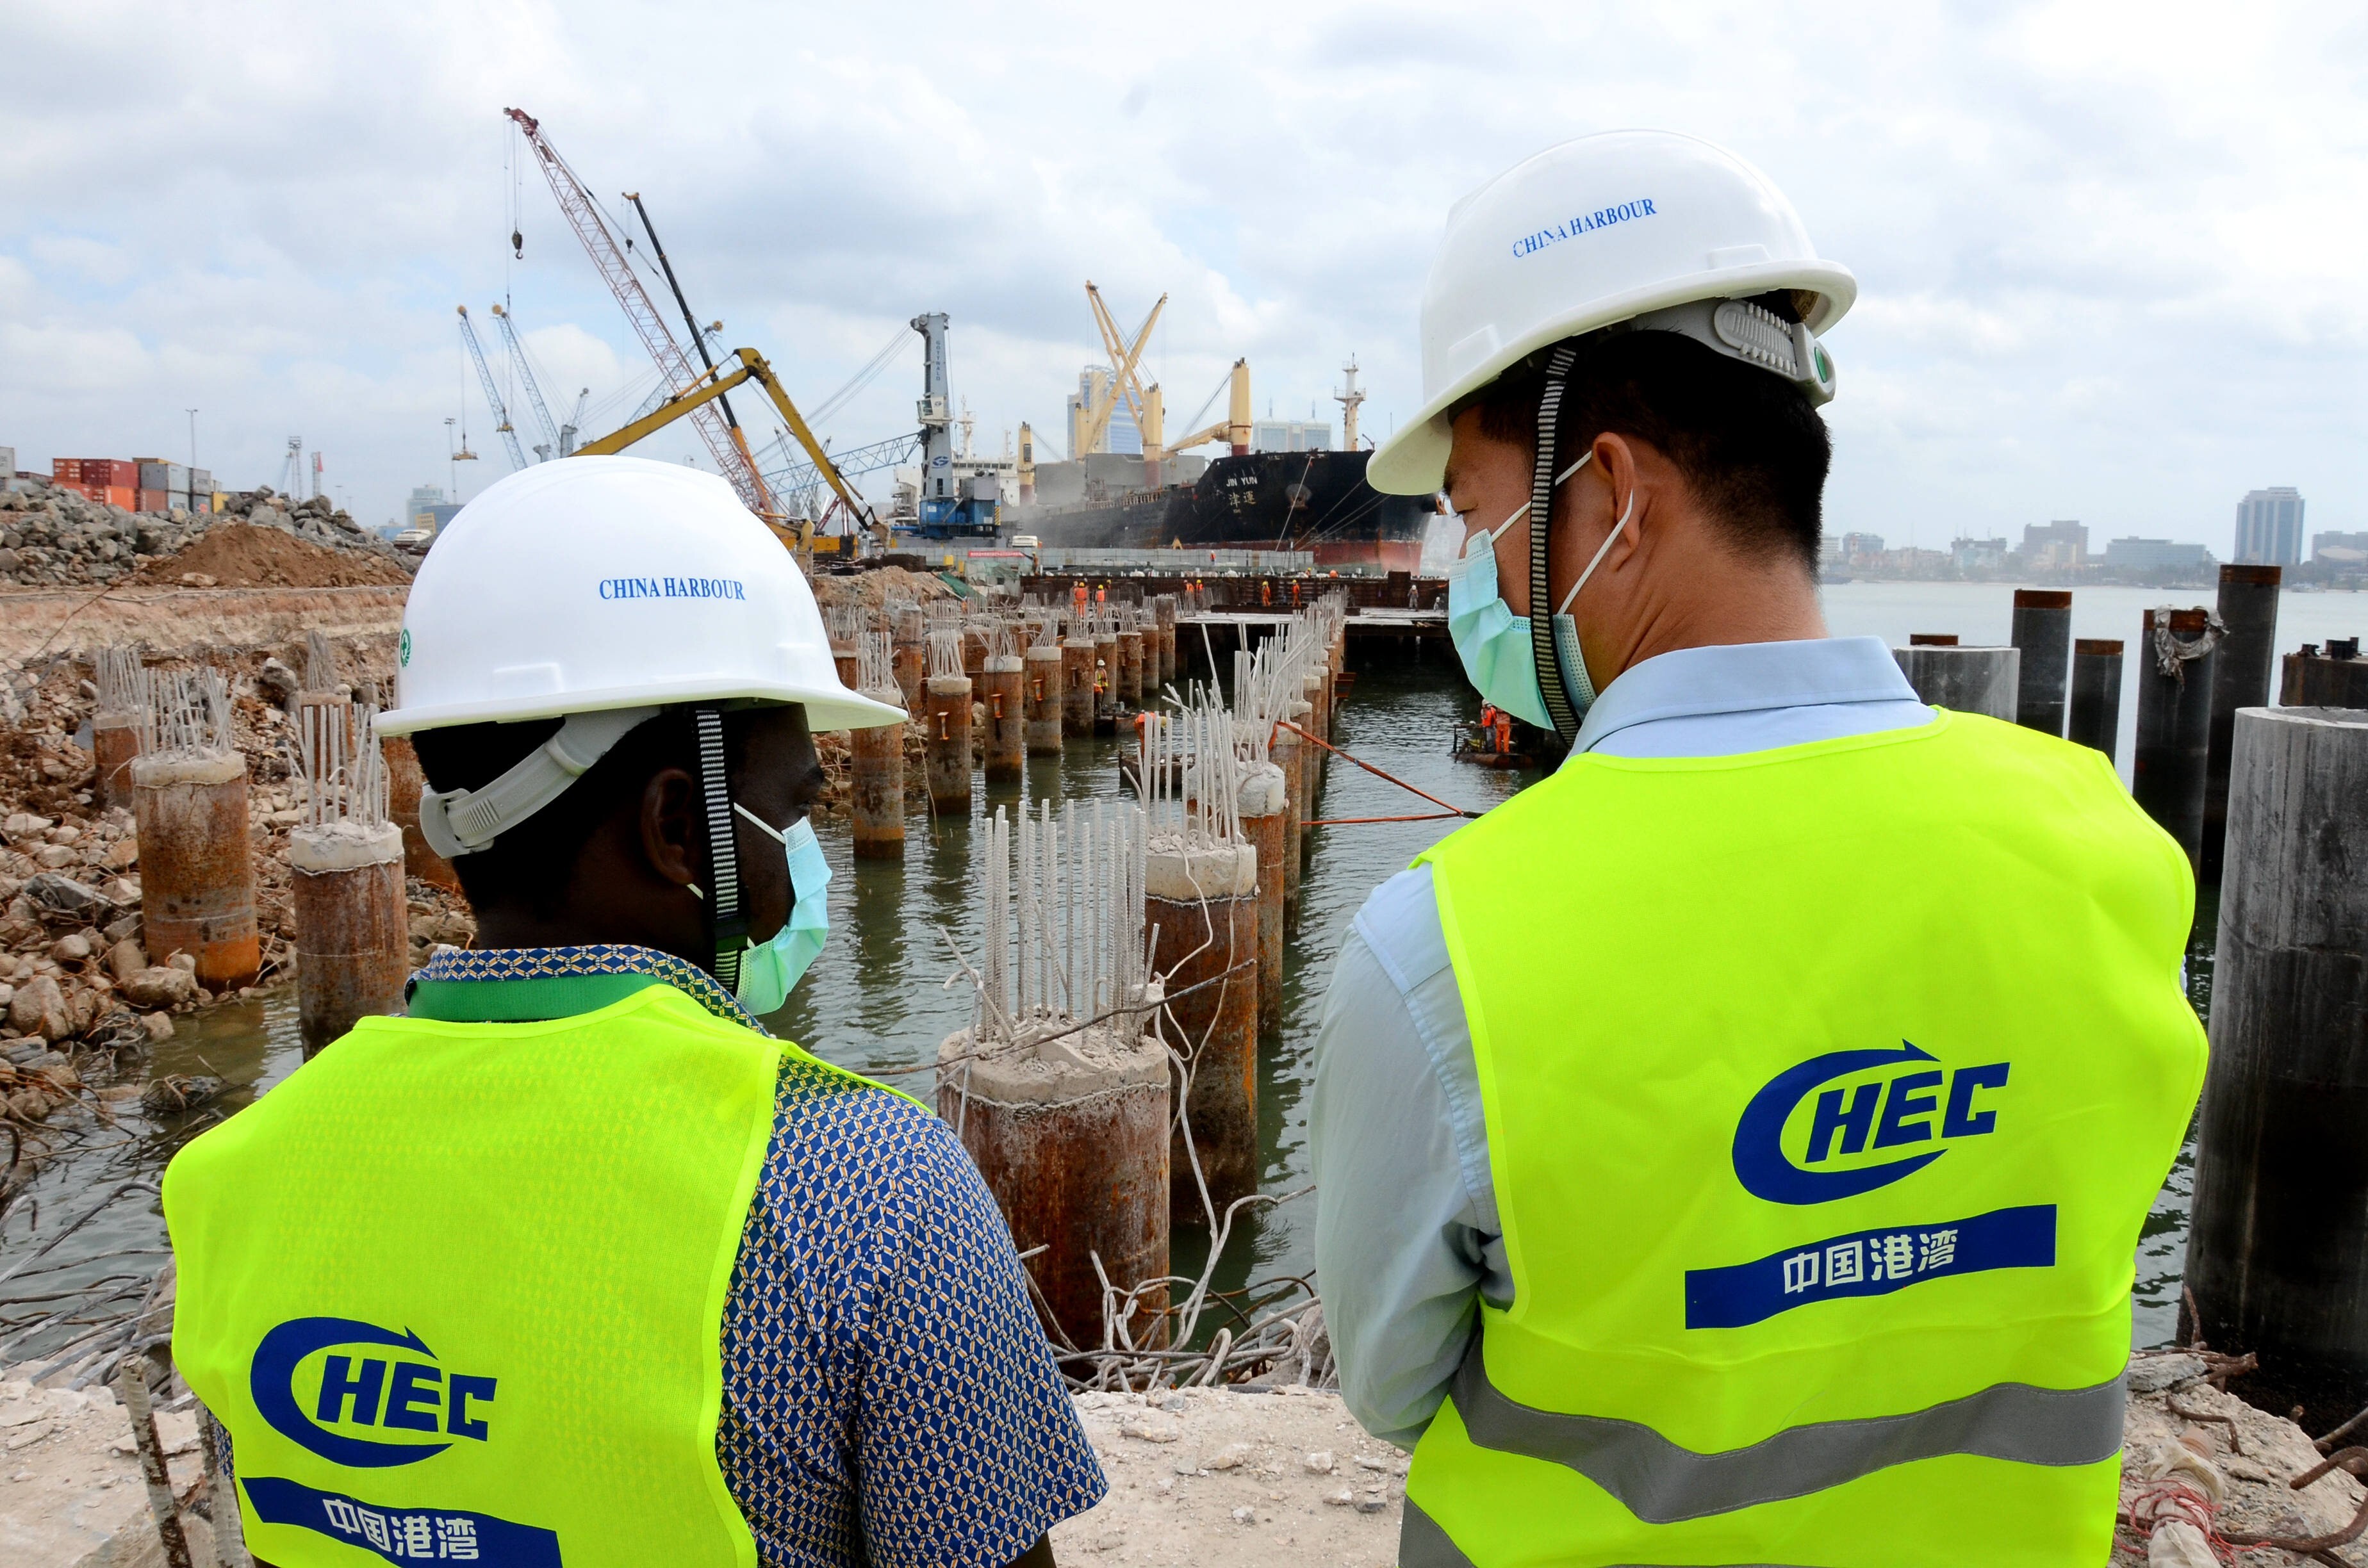 Engineers from Tanzania and China discuss construction plans at the building site of a project to upgrade the Dar es Salaam Port in Tanzania, on July 8, 2020. Photo: Xinhua